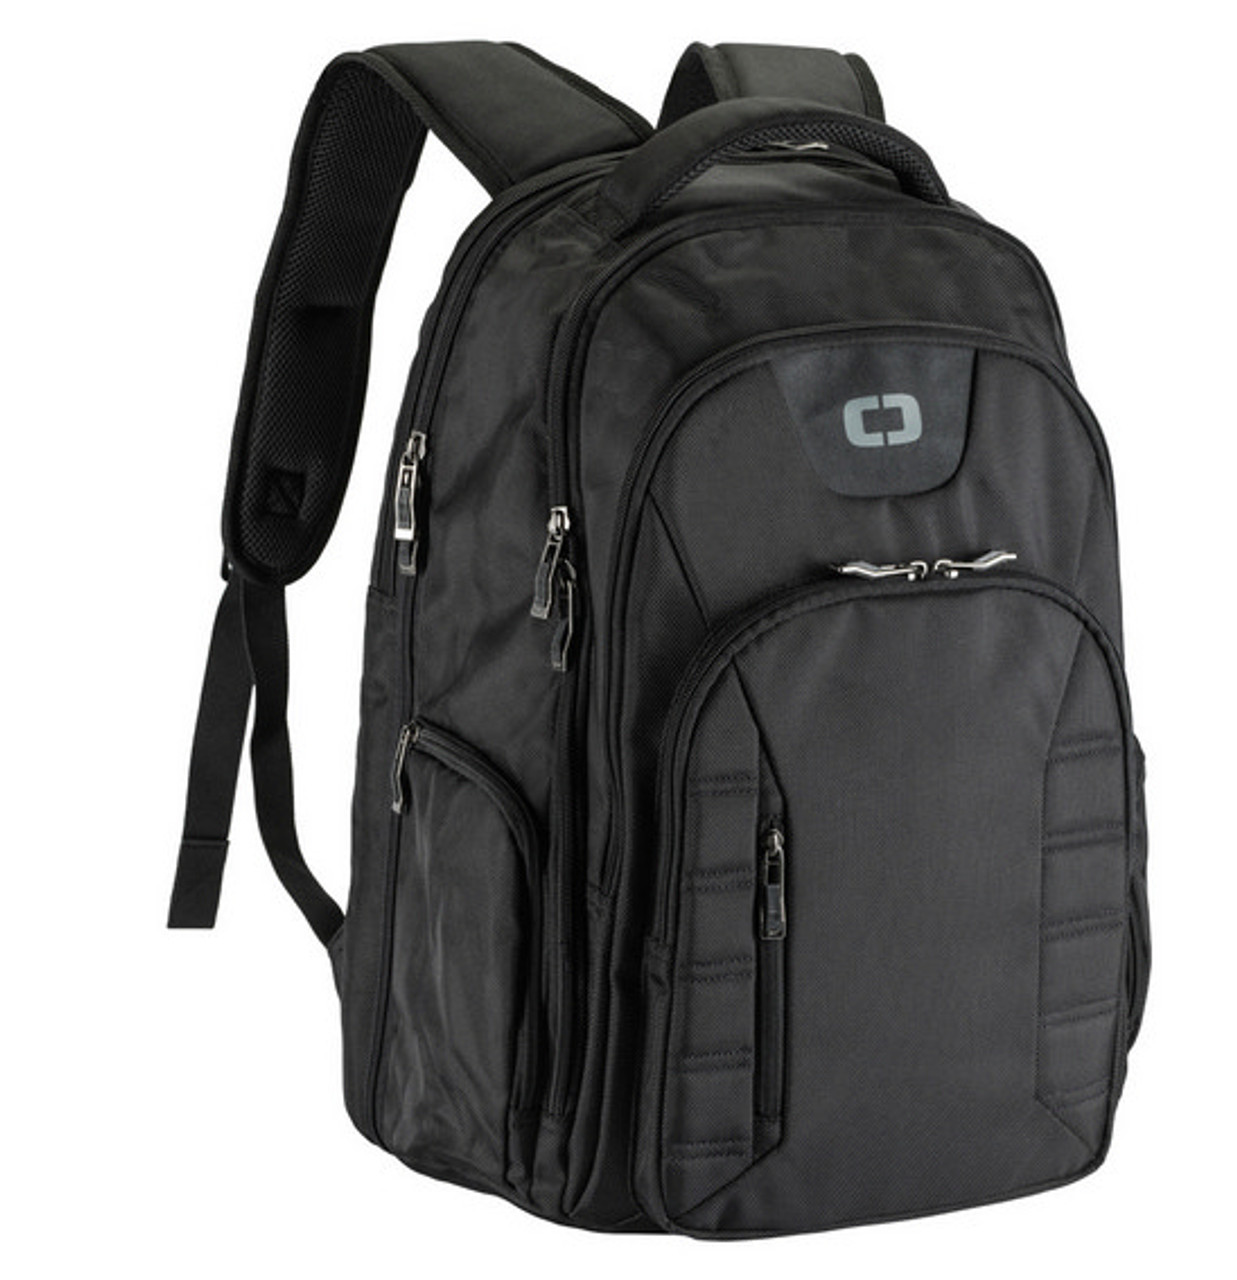 Ogio RALLY Backpack - Black - La Moto Powersports Superstore